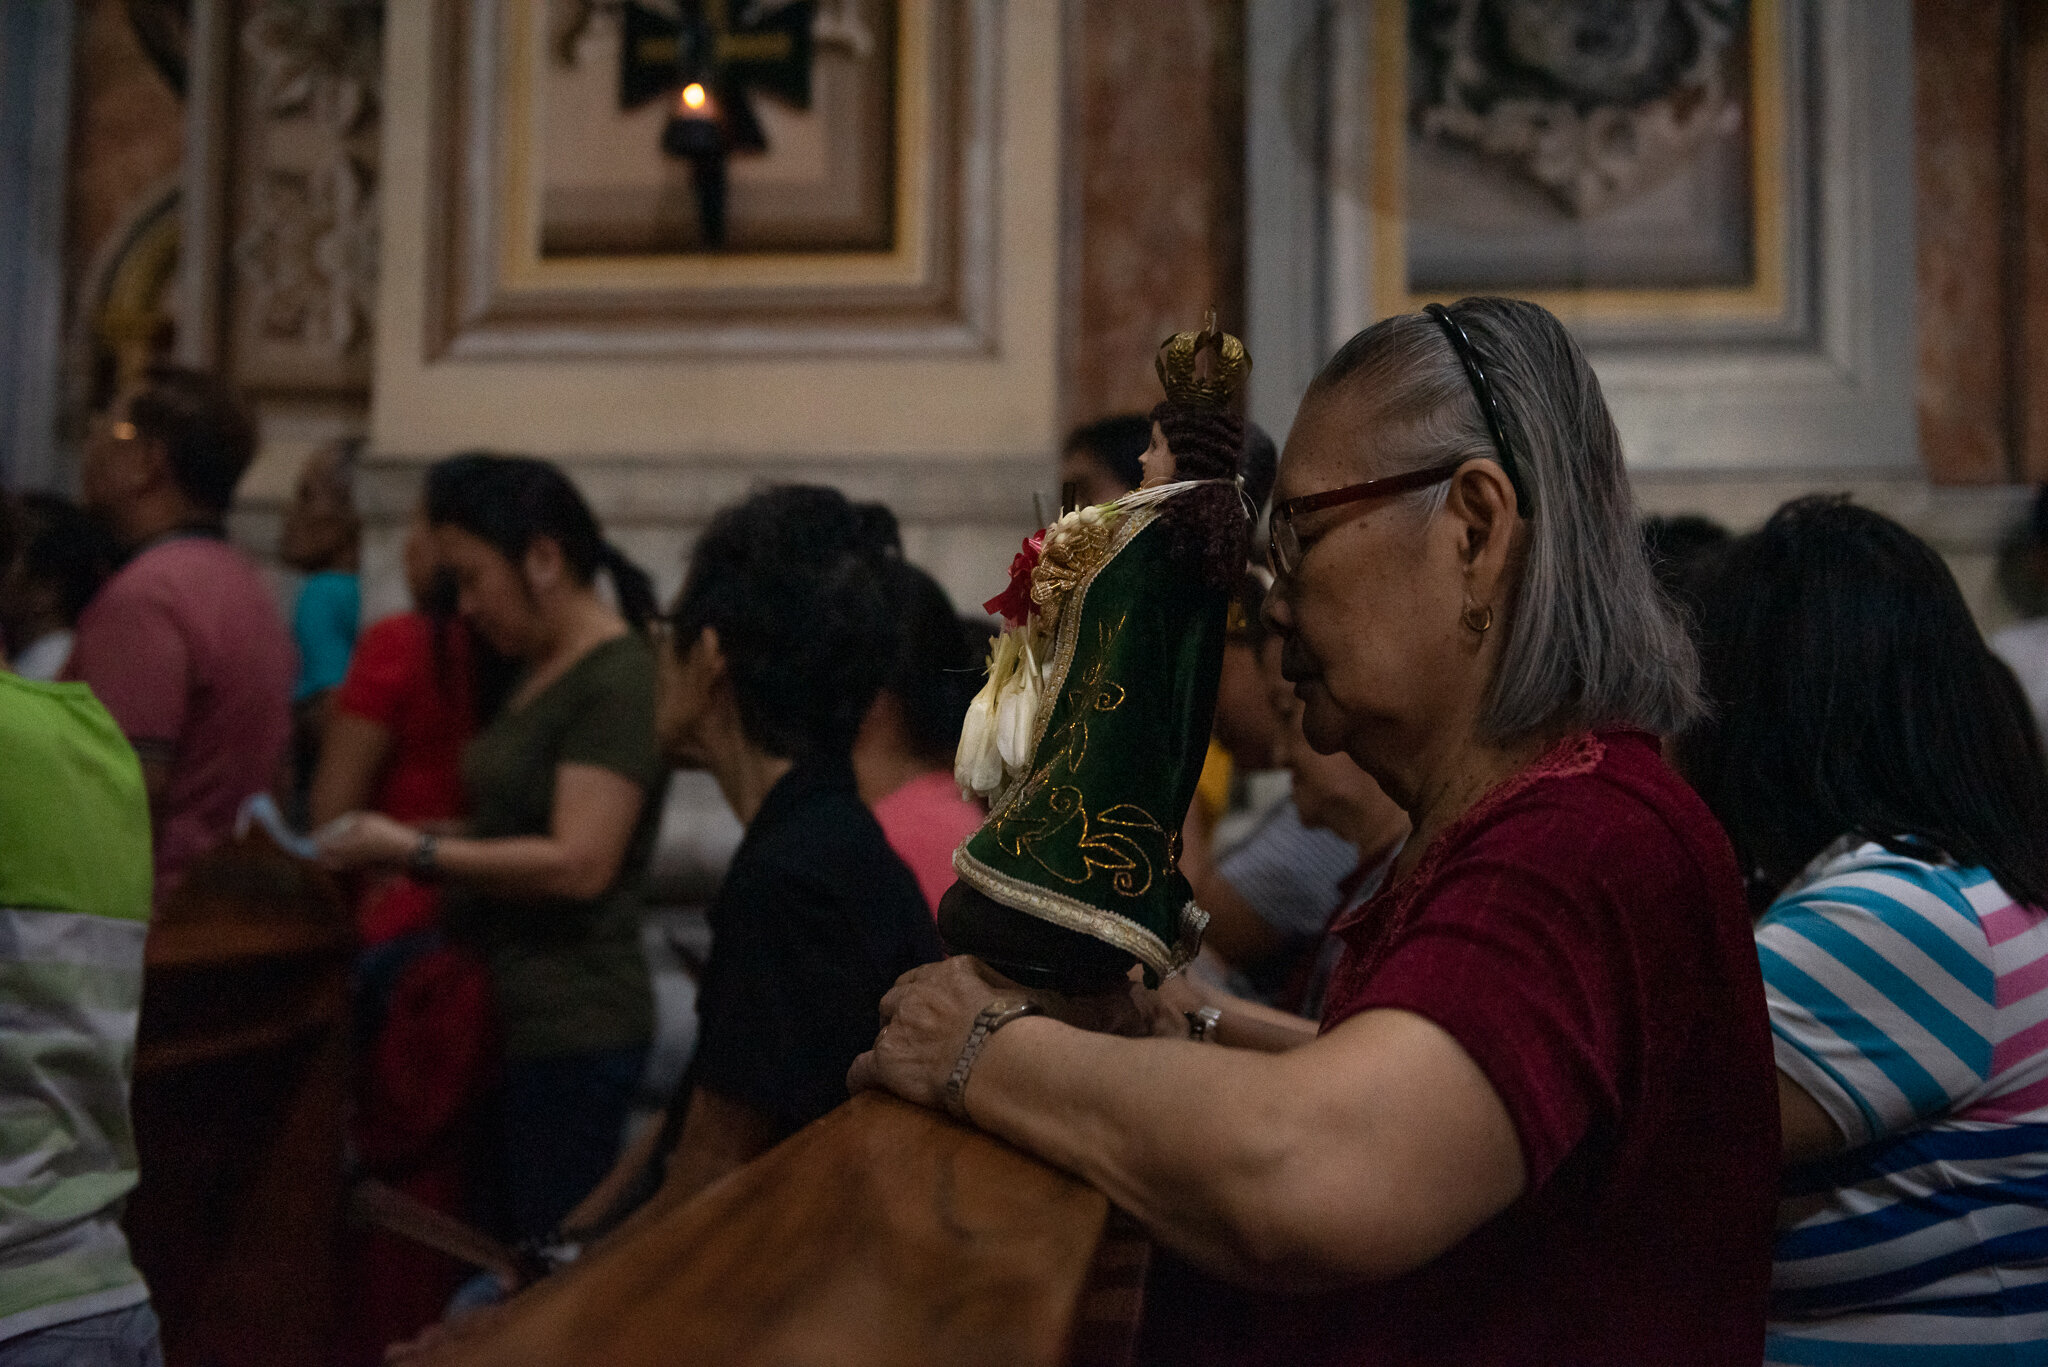  An old woman praying in church with an images of the Jesus. 